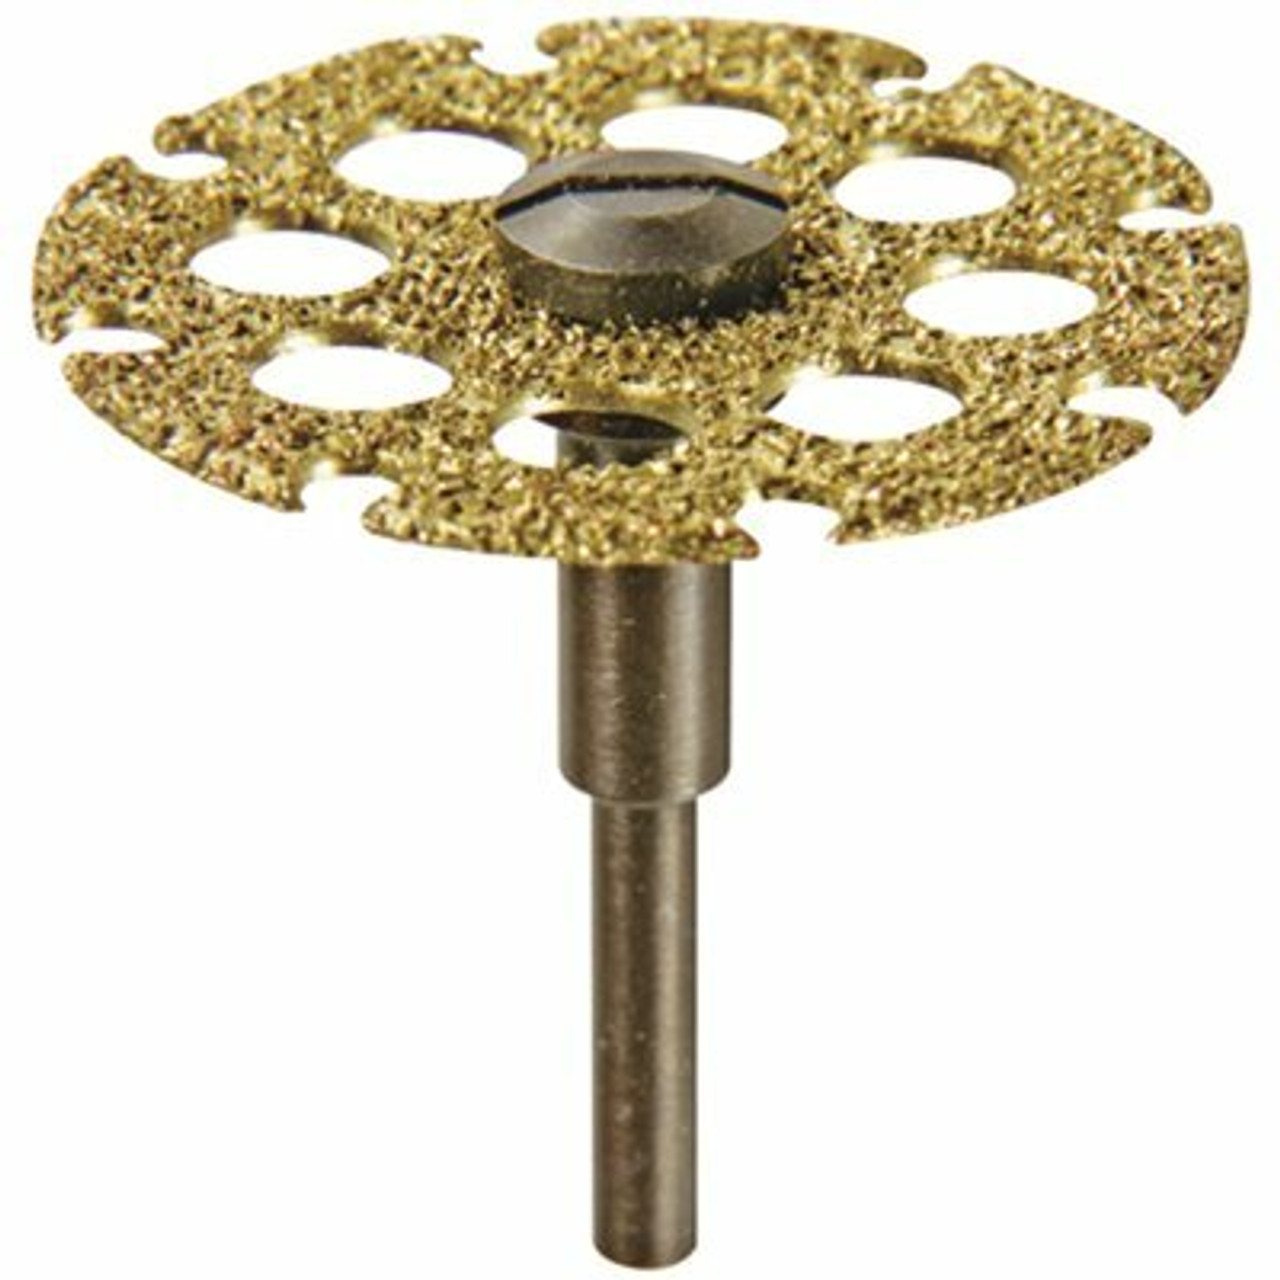 Dremel 1-1/4 In. Rotary Tool Carbide Cutting/Shaping Wheel For Use On Woods, Fiberglass, Plastics And Laminates